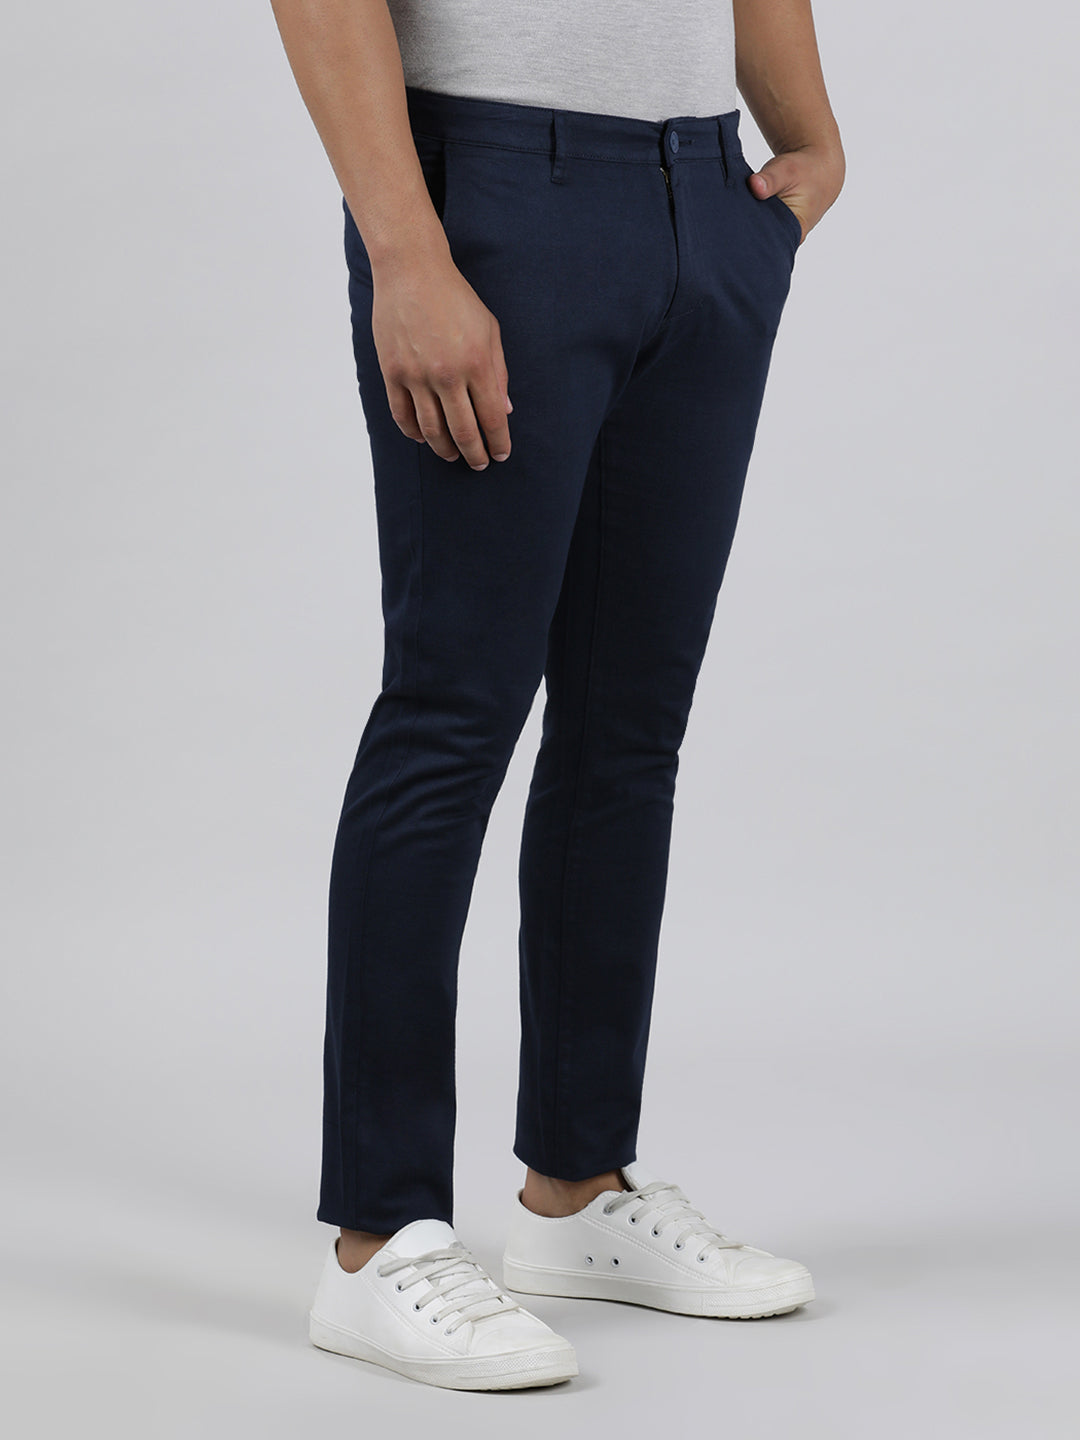 Casual Slim Fit Printed Navy Trousers for Men